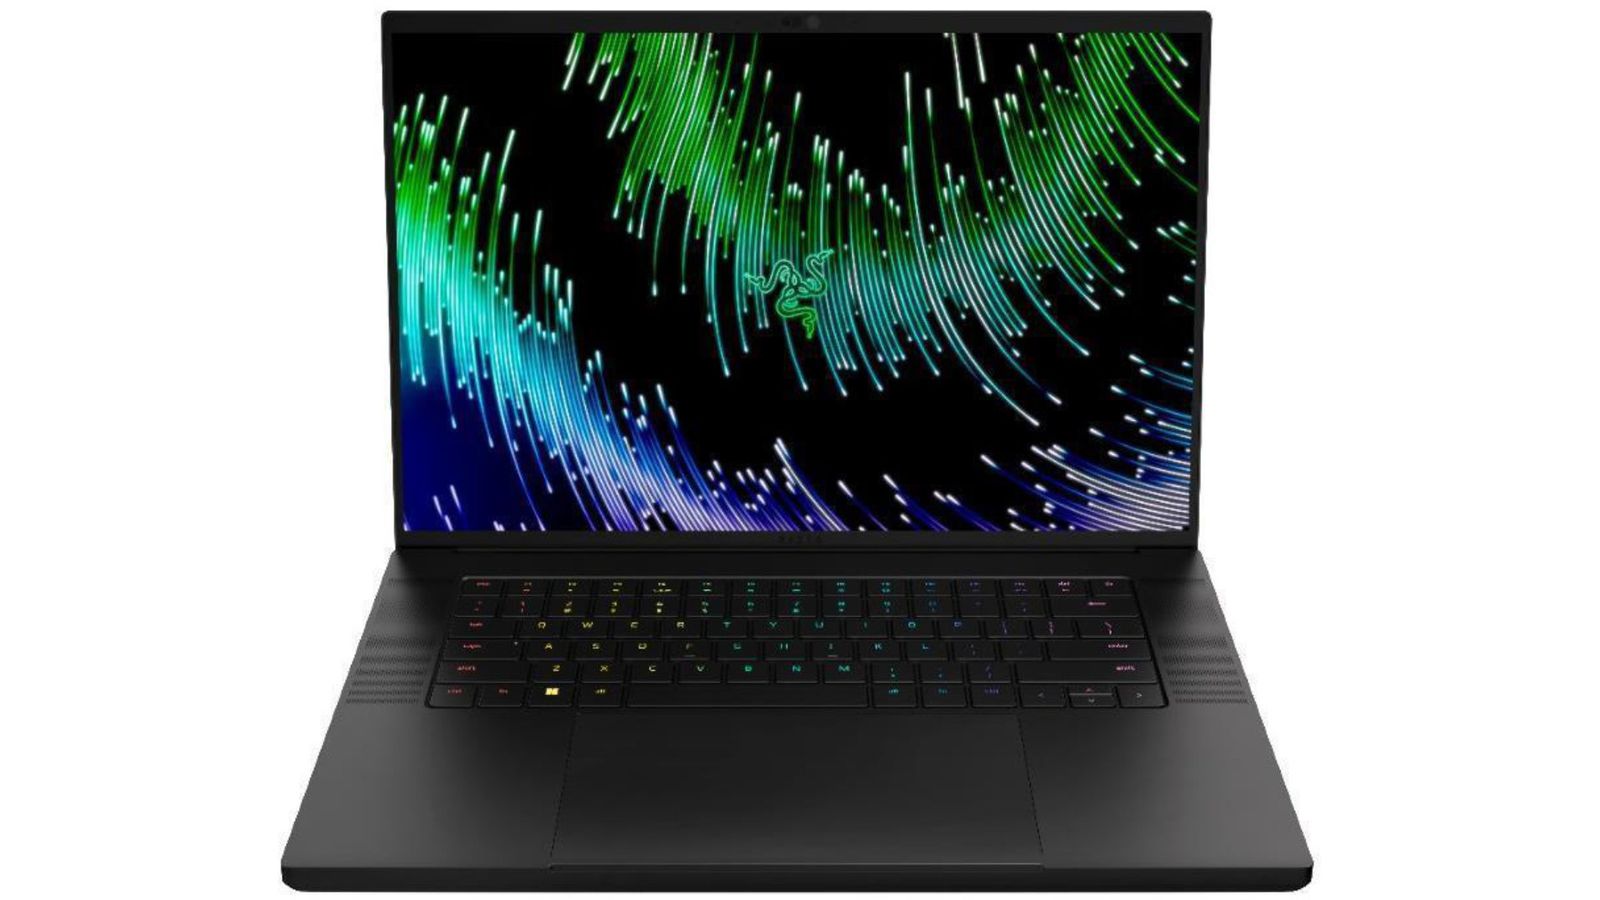 A Razer Blade gaming laptop with a green and blue fibre optic cable background on screen